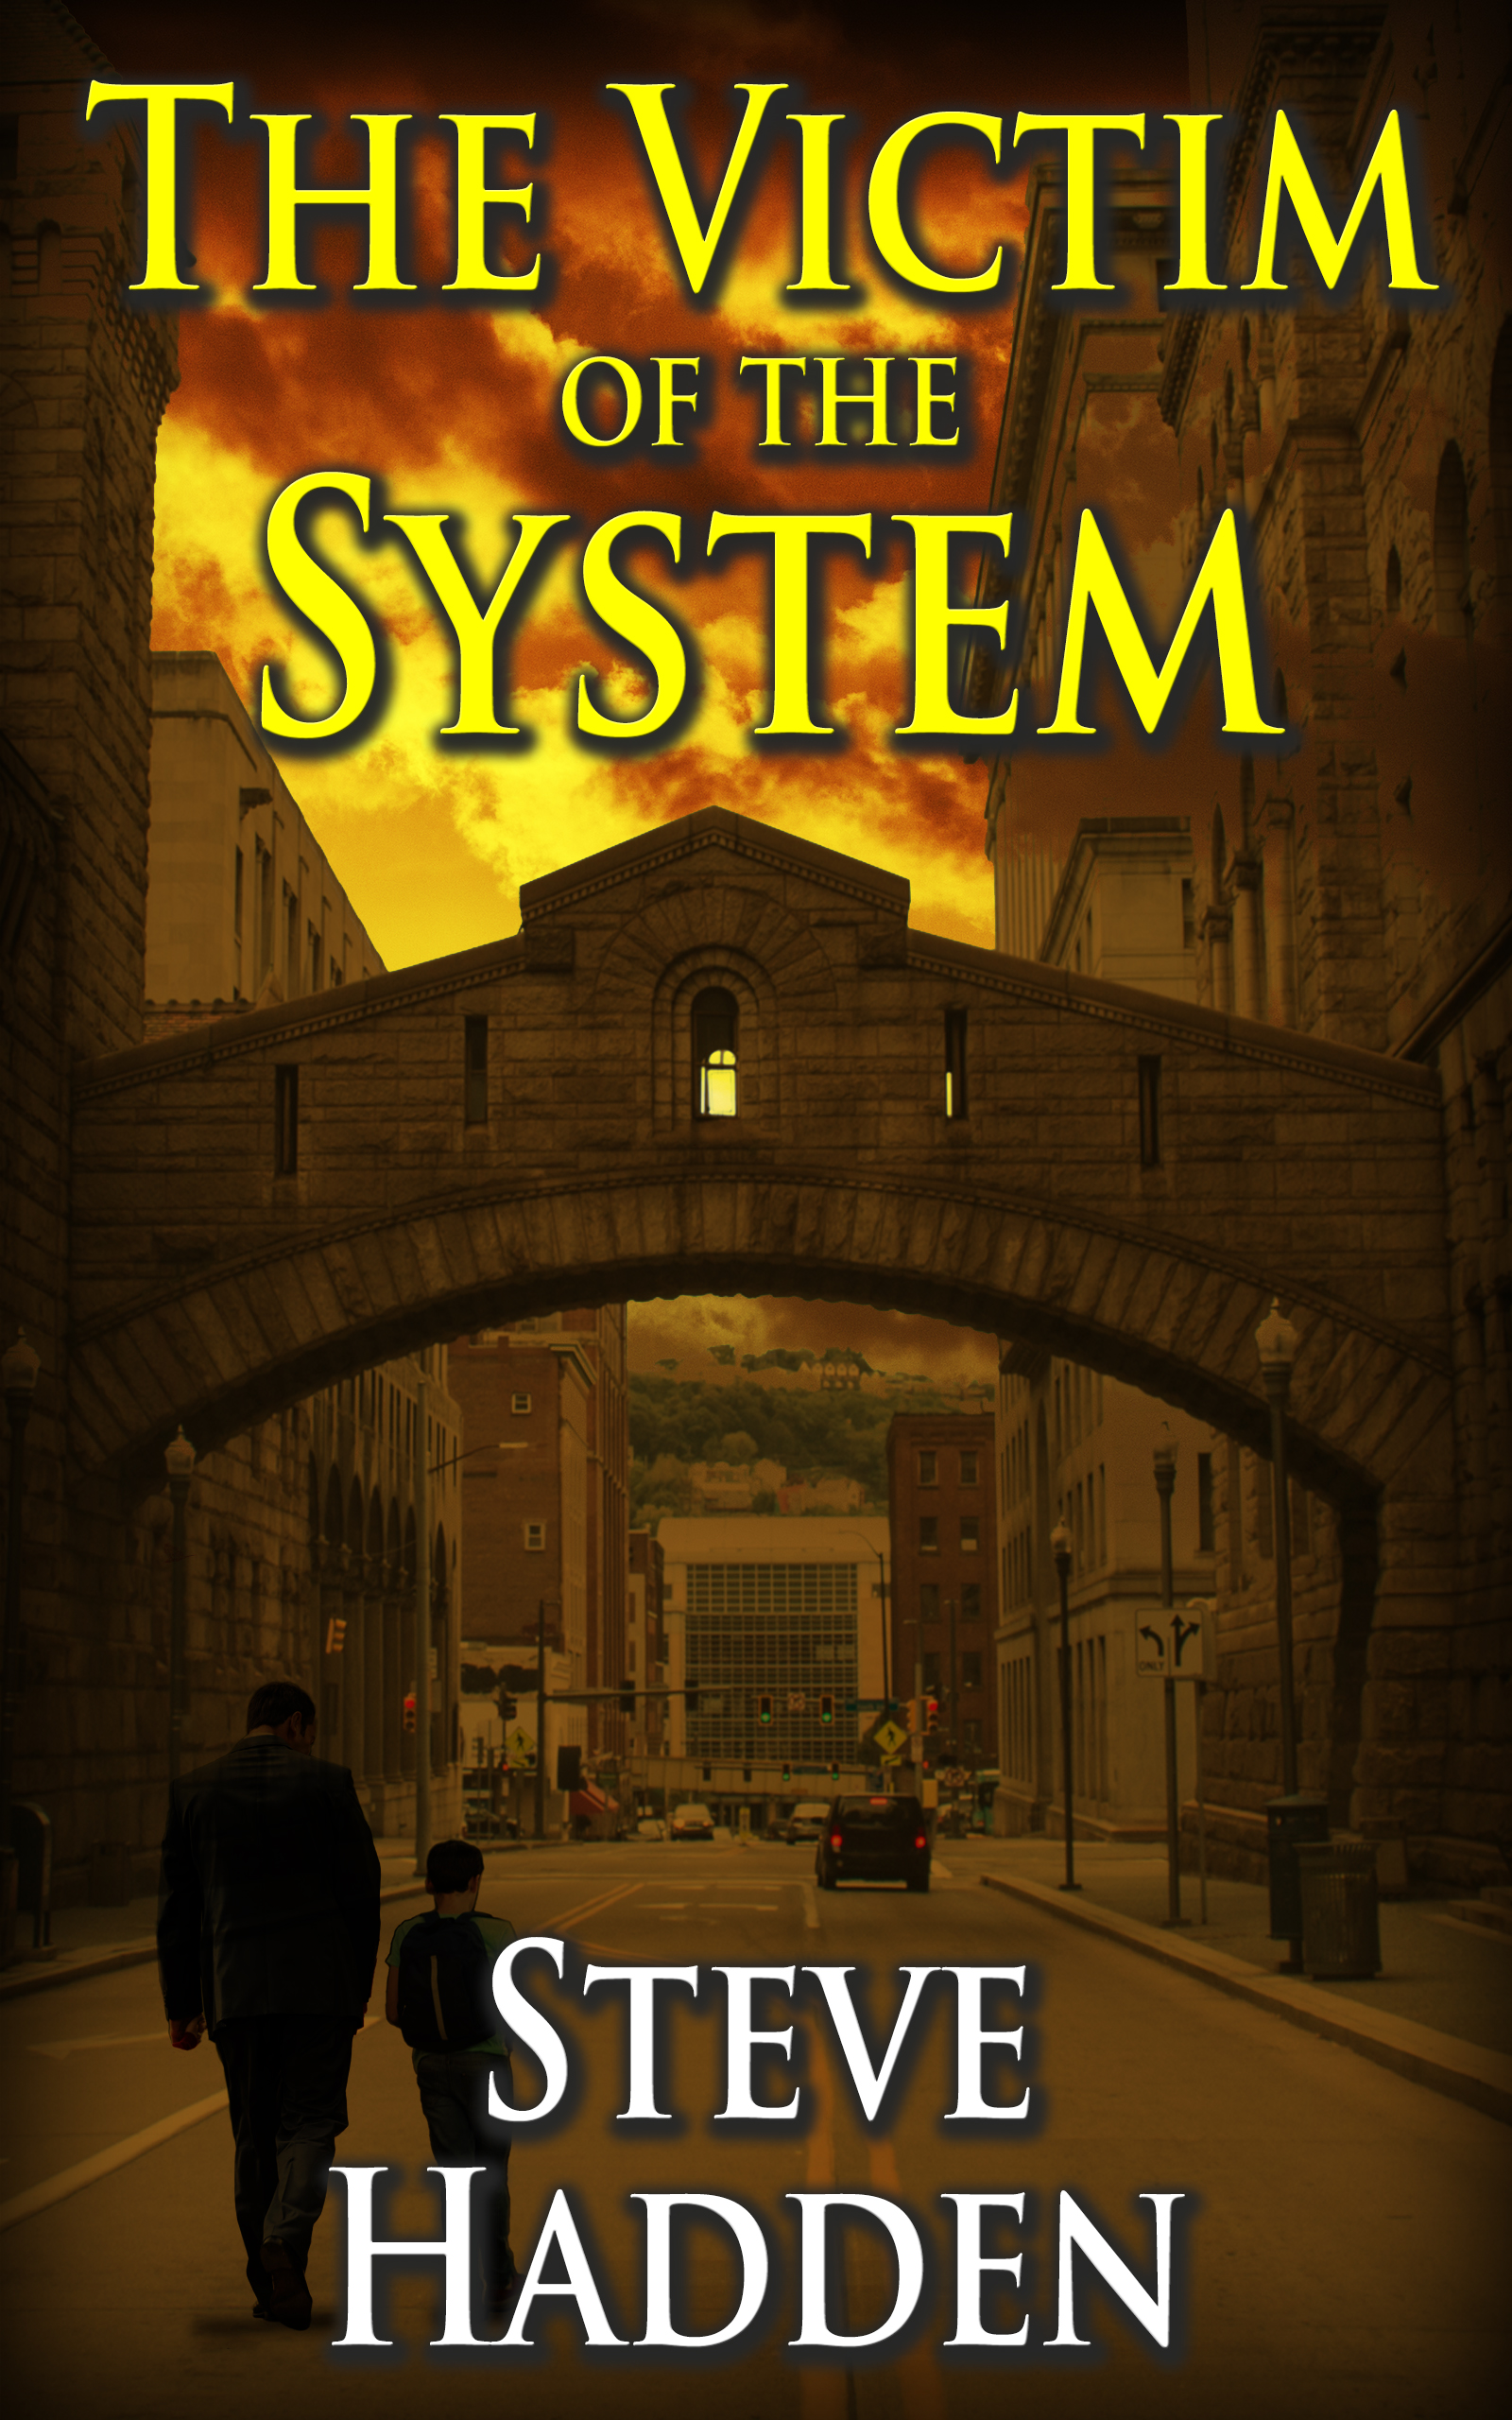 The Victim of the System by Steve Hadden